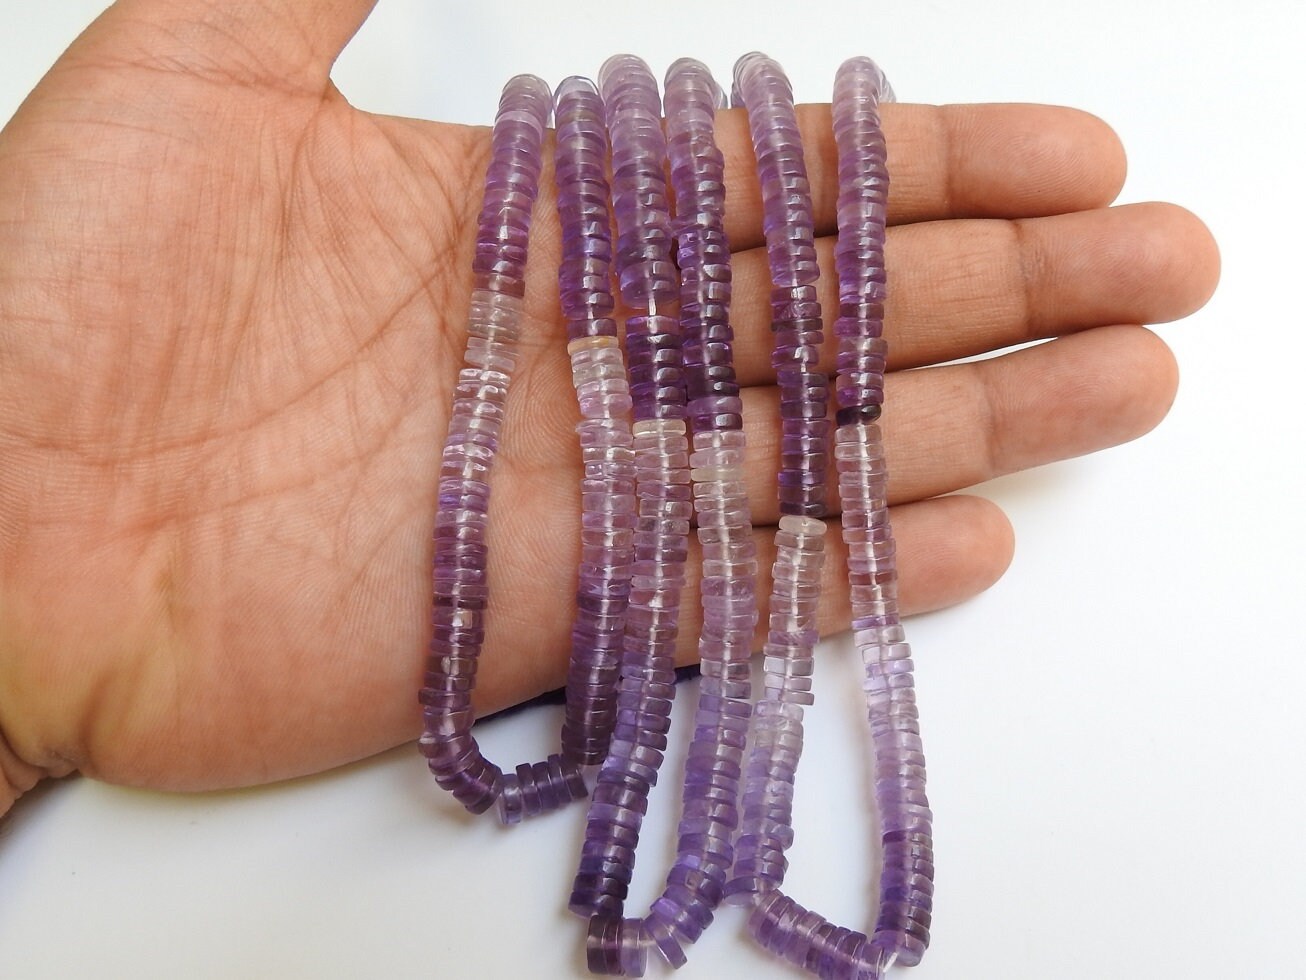 Natural Amethyst Smooth Tyre,Coin,Button,Wheel Shape Bead,Multi Shaded,Loose Stone,Wholesaler,Supplies New Arrival 16Inch Strand (Pme)T1 | Save 33% - Rajasthan Living 21